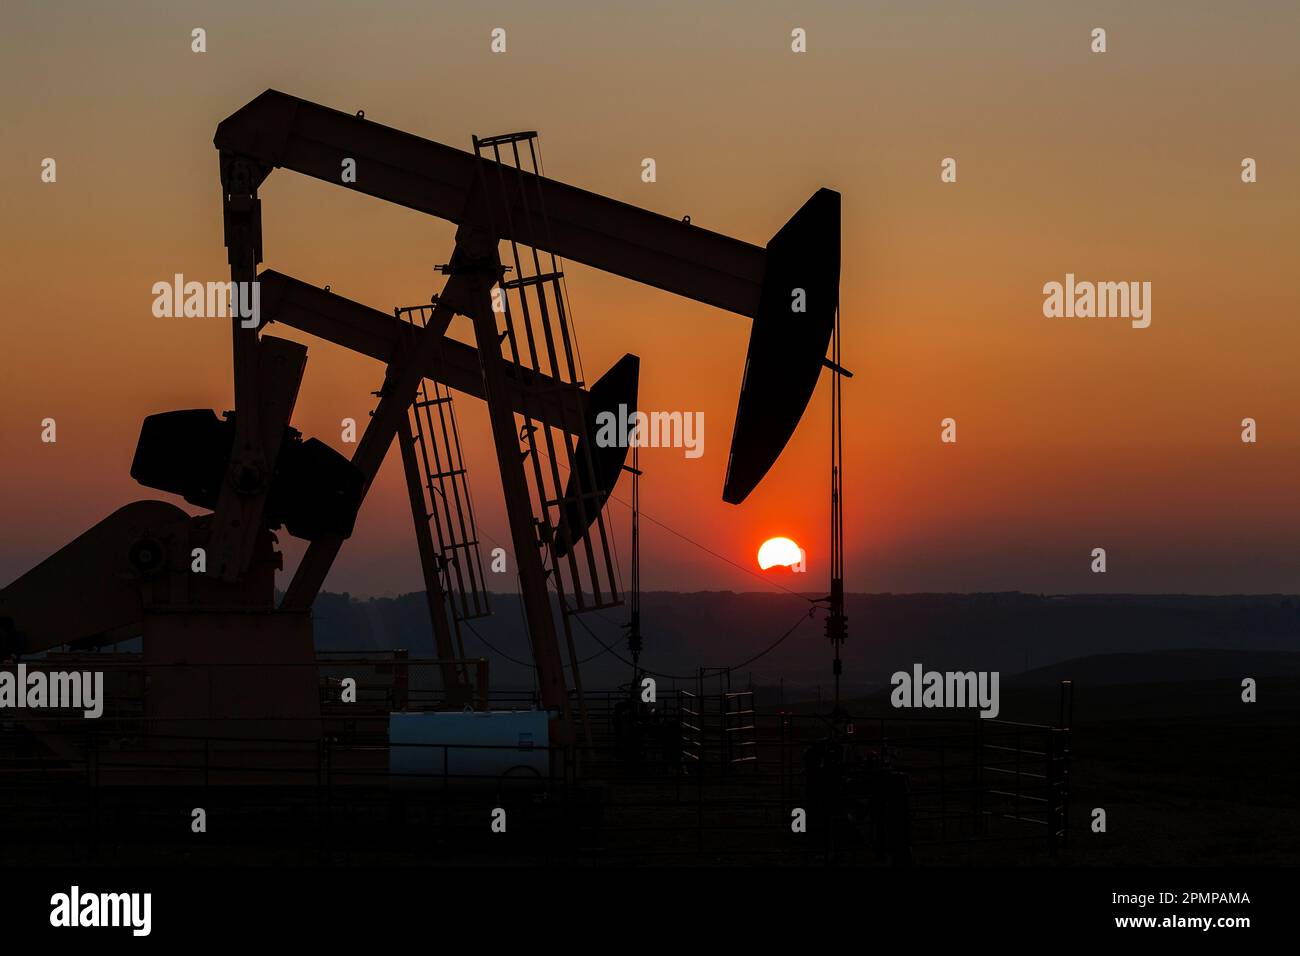 Silhouette of pumpjacks with an orange glowing sky at sunset, West of Airdrie; Alberta, Canada Stock Photo